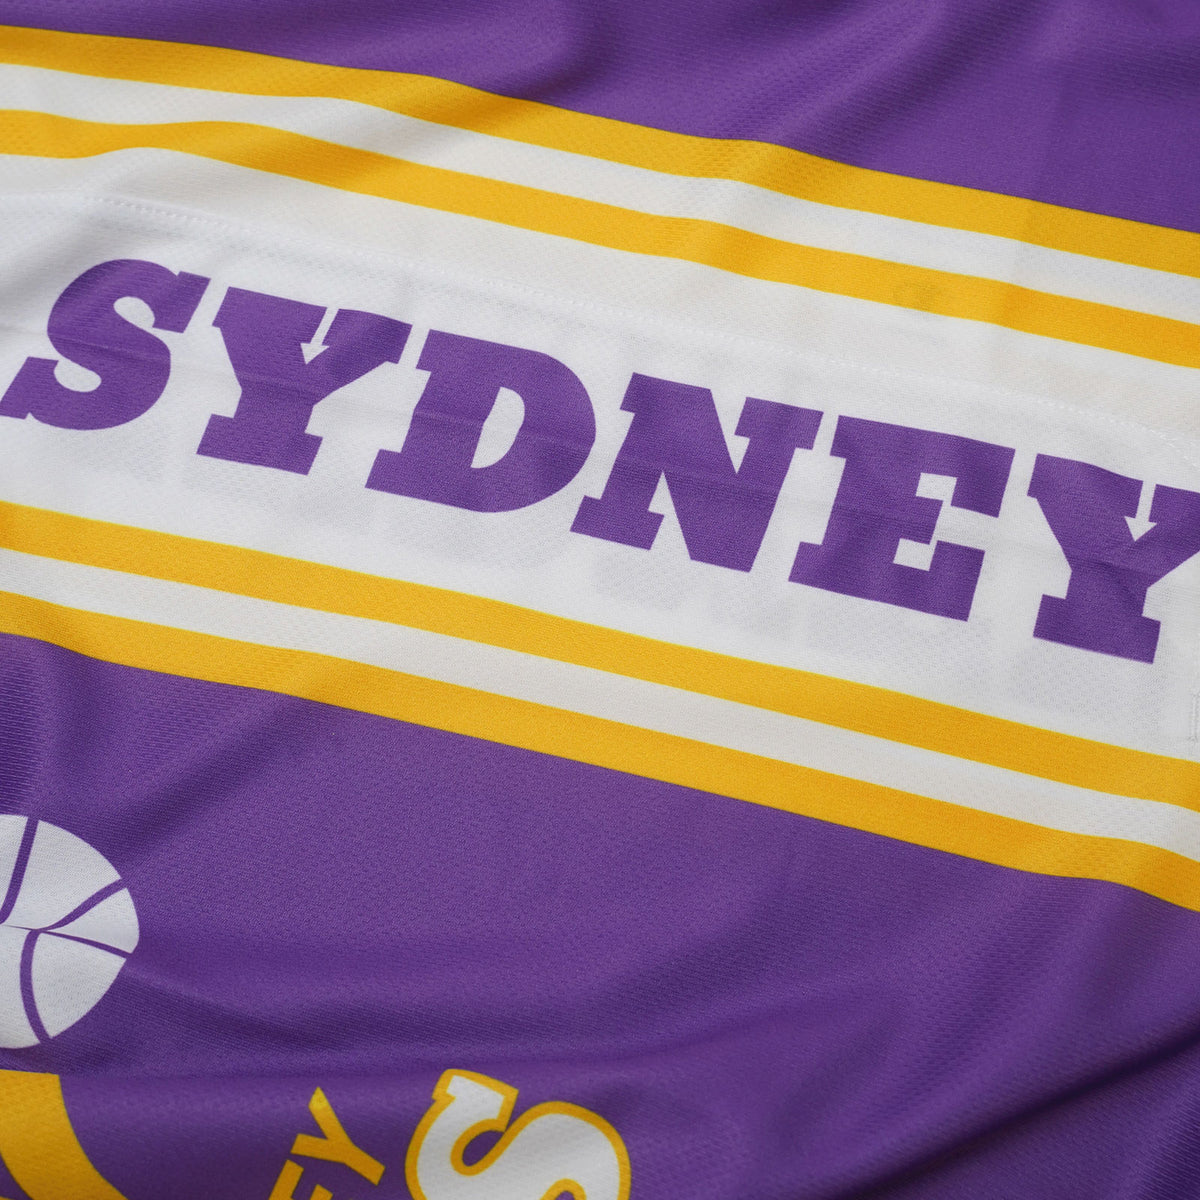 Xavier Cooks Sydney Kings Throwback Heritage Authentic Jersey - Purple